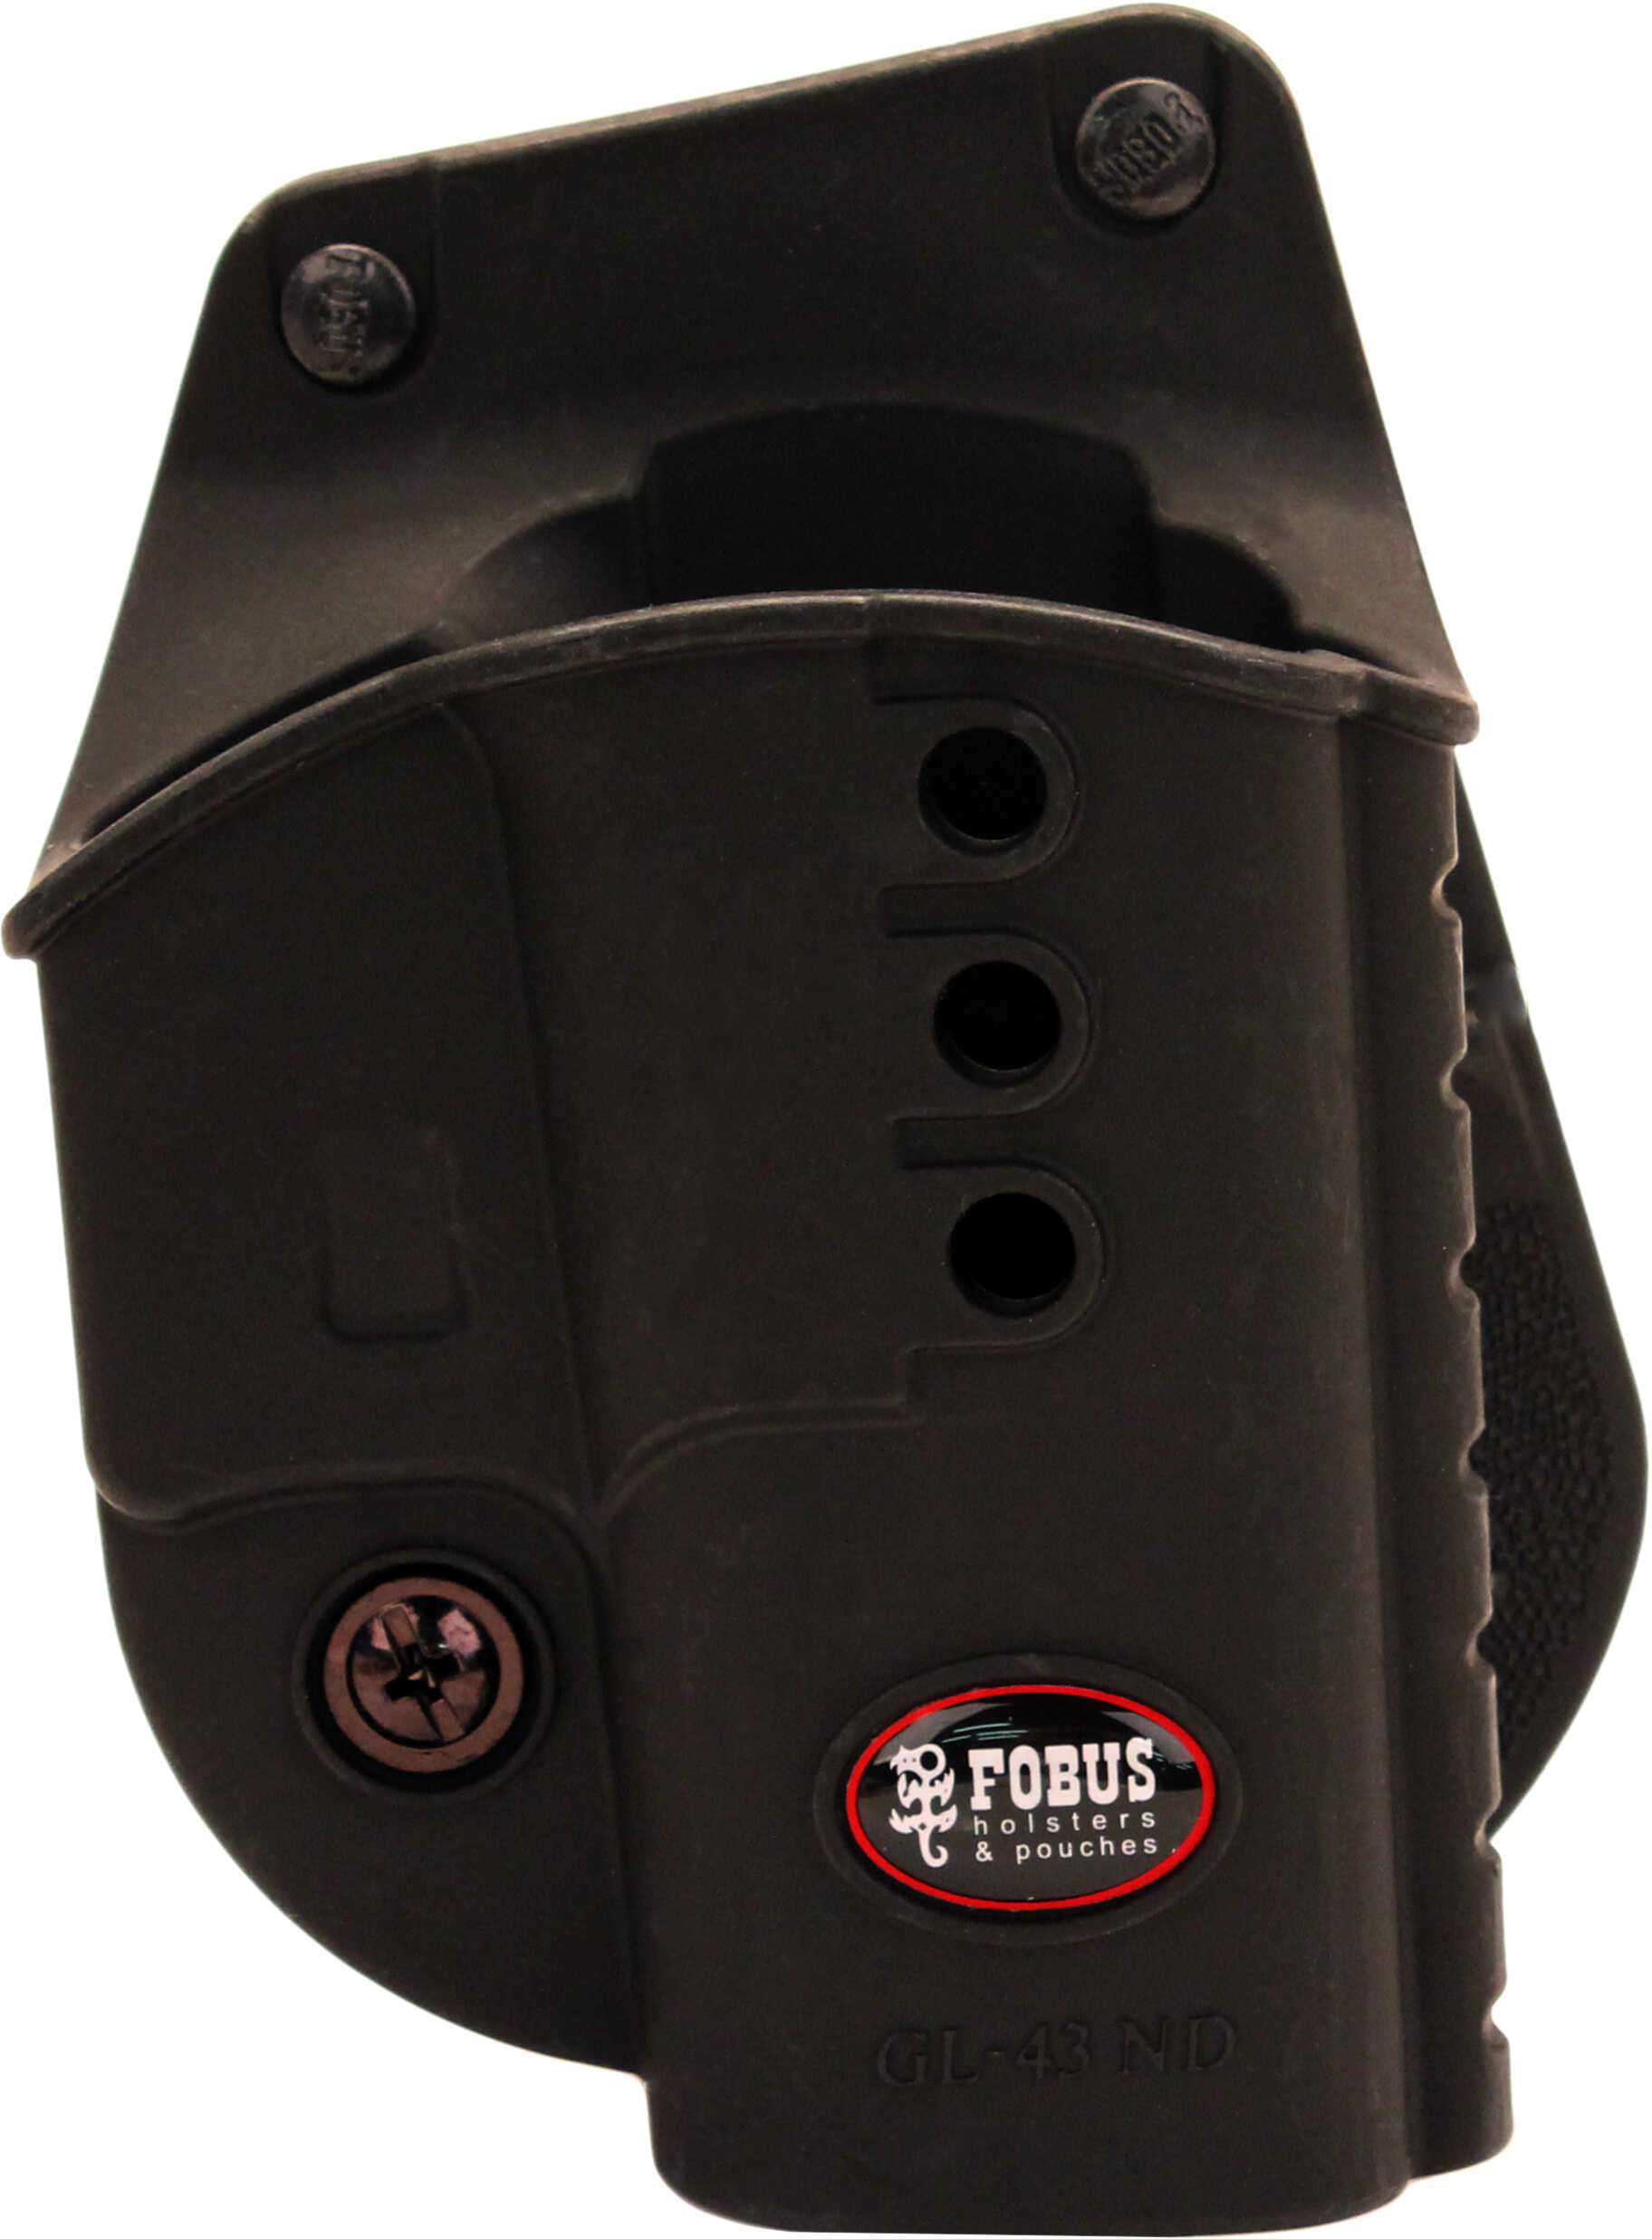 Fobus Paddle Holster Fits Glock 43 Right Hand Black GL43ND